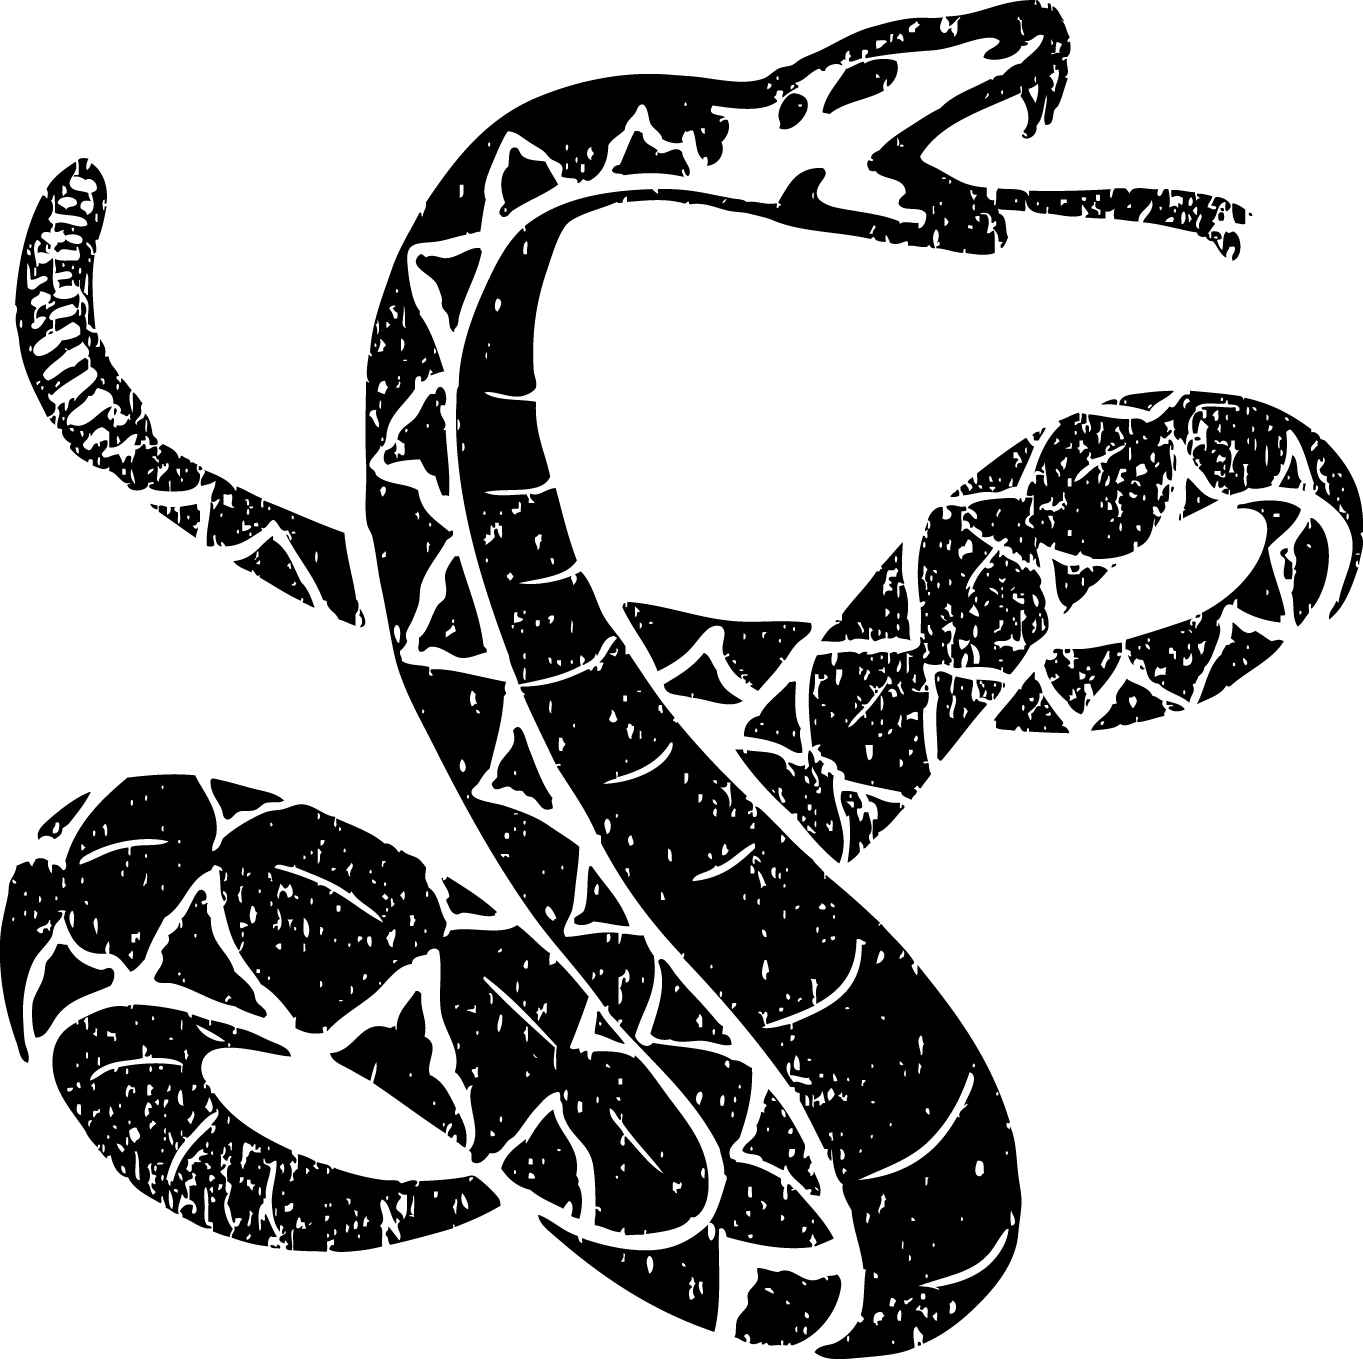 Snake logo with rattle and tongue